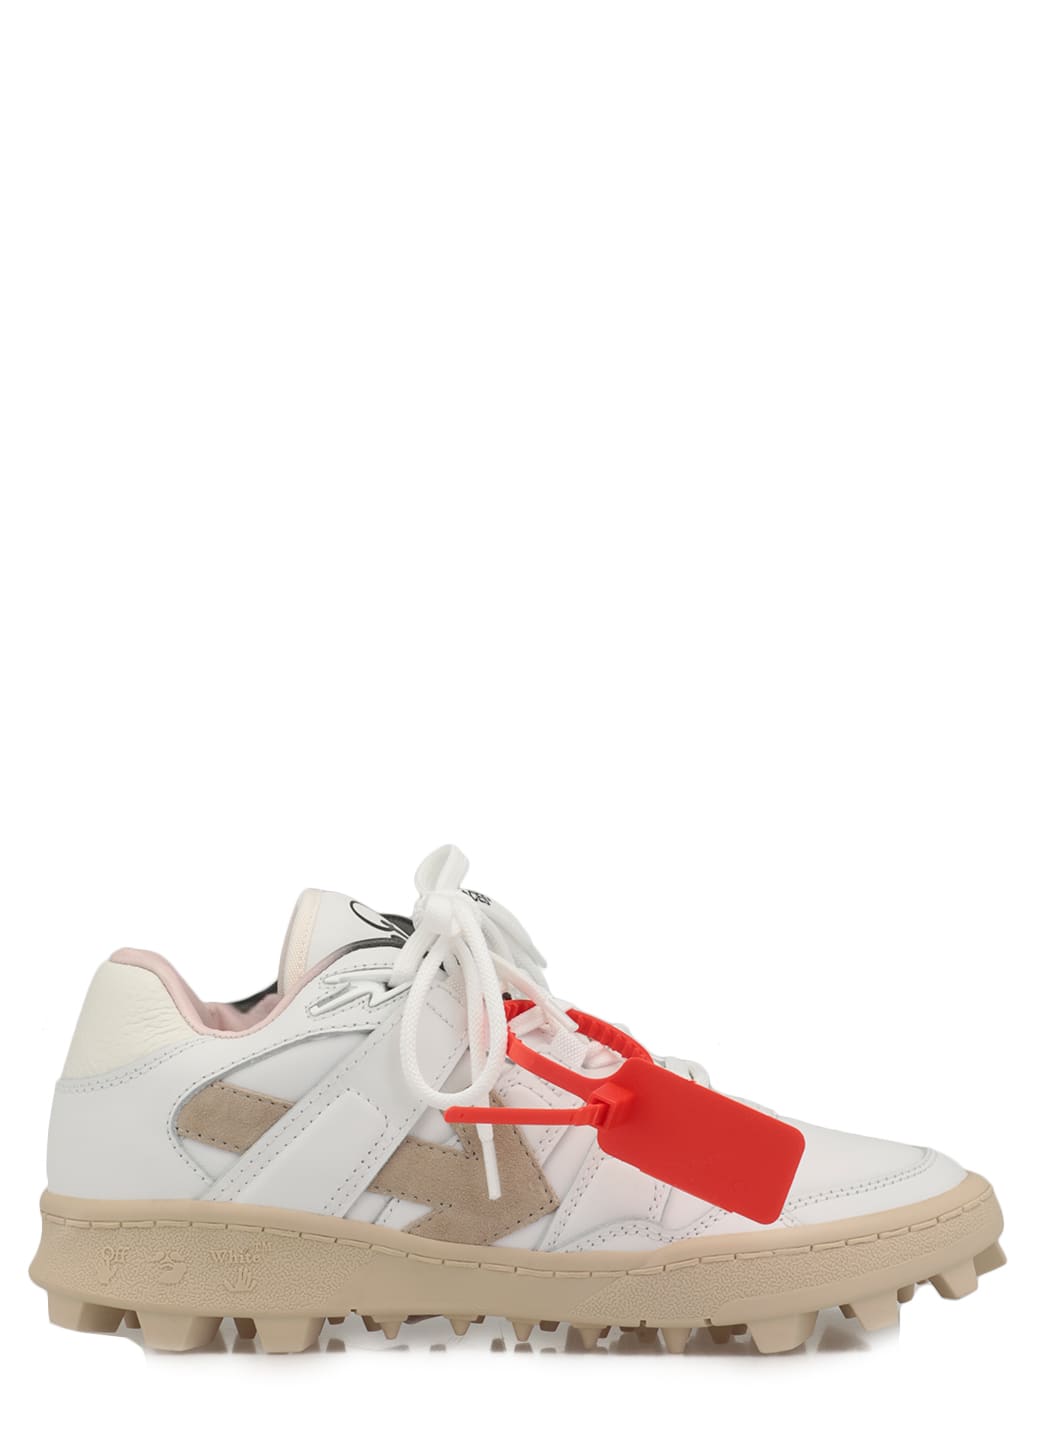 Off-White Smooth Leather Sneaker